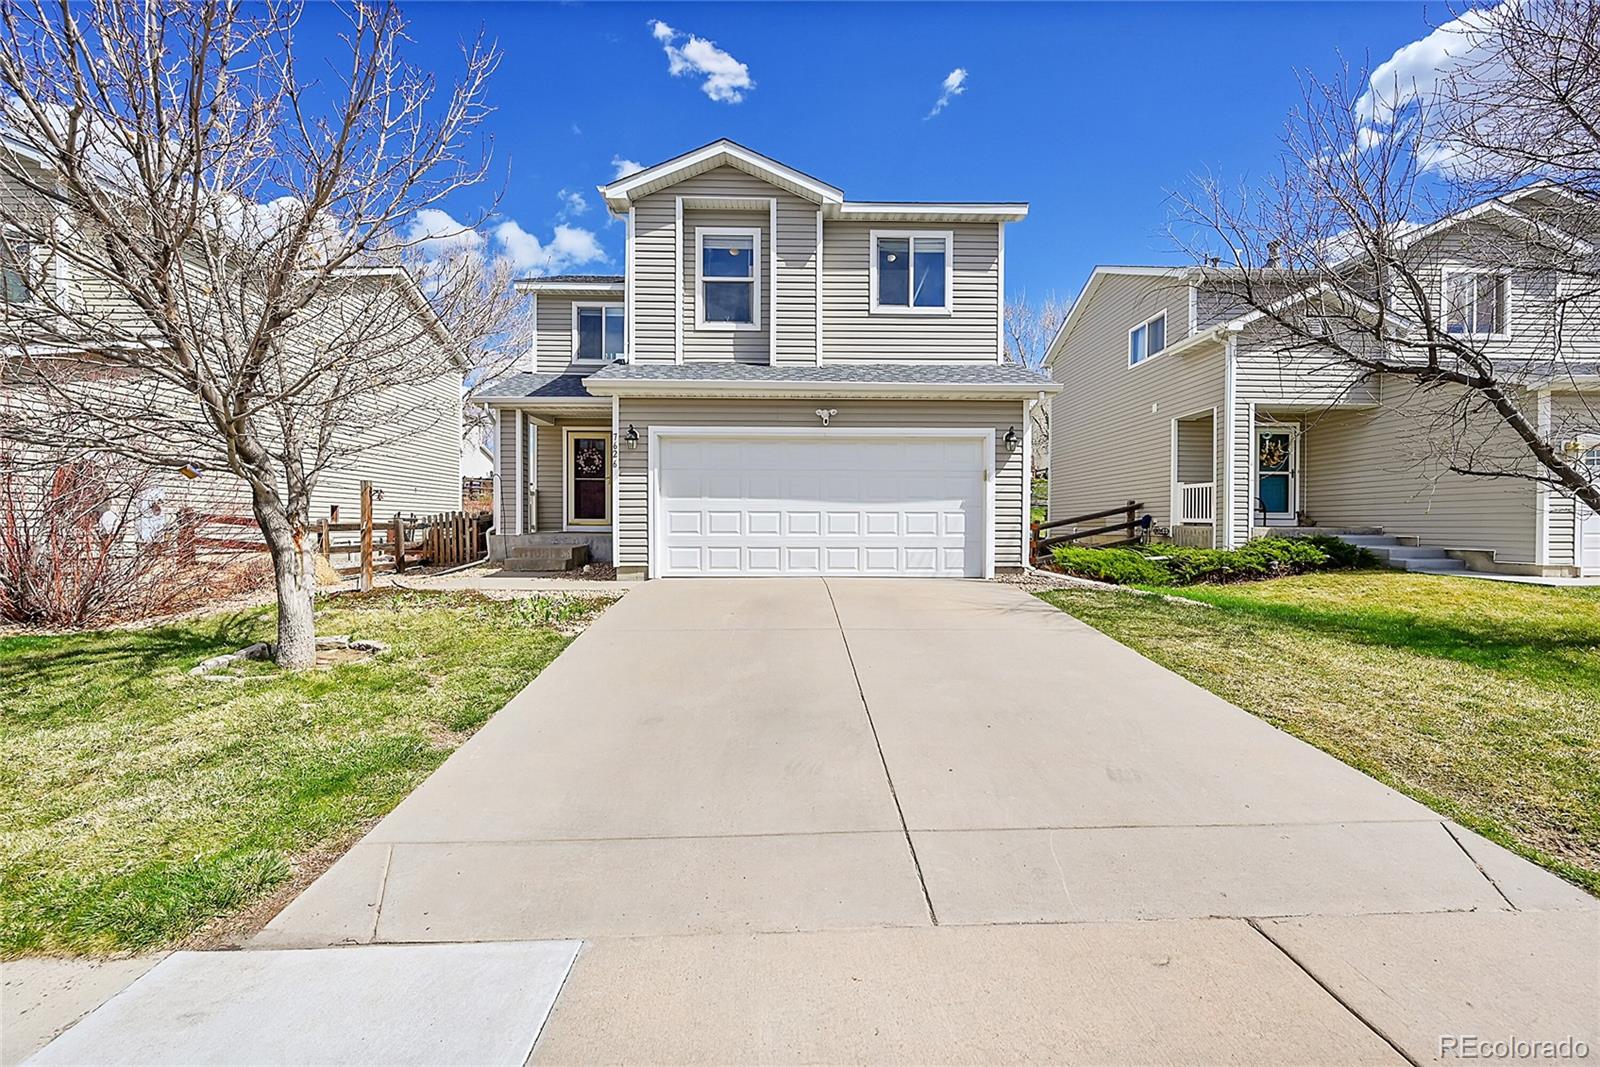 7626  brown bear way, Littleton sold home. Closed on 2024-05-20 for $550,000.